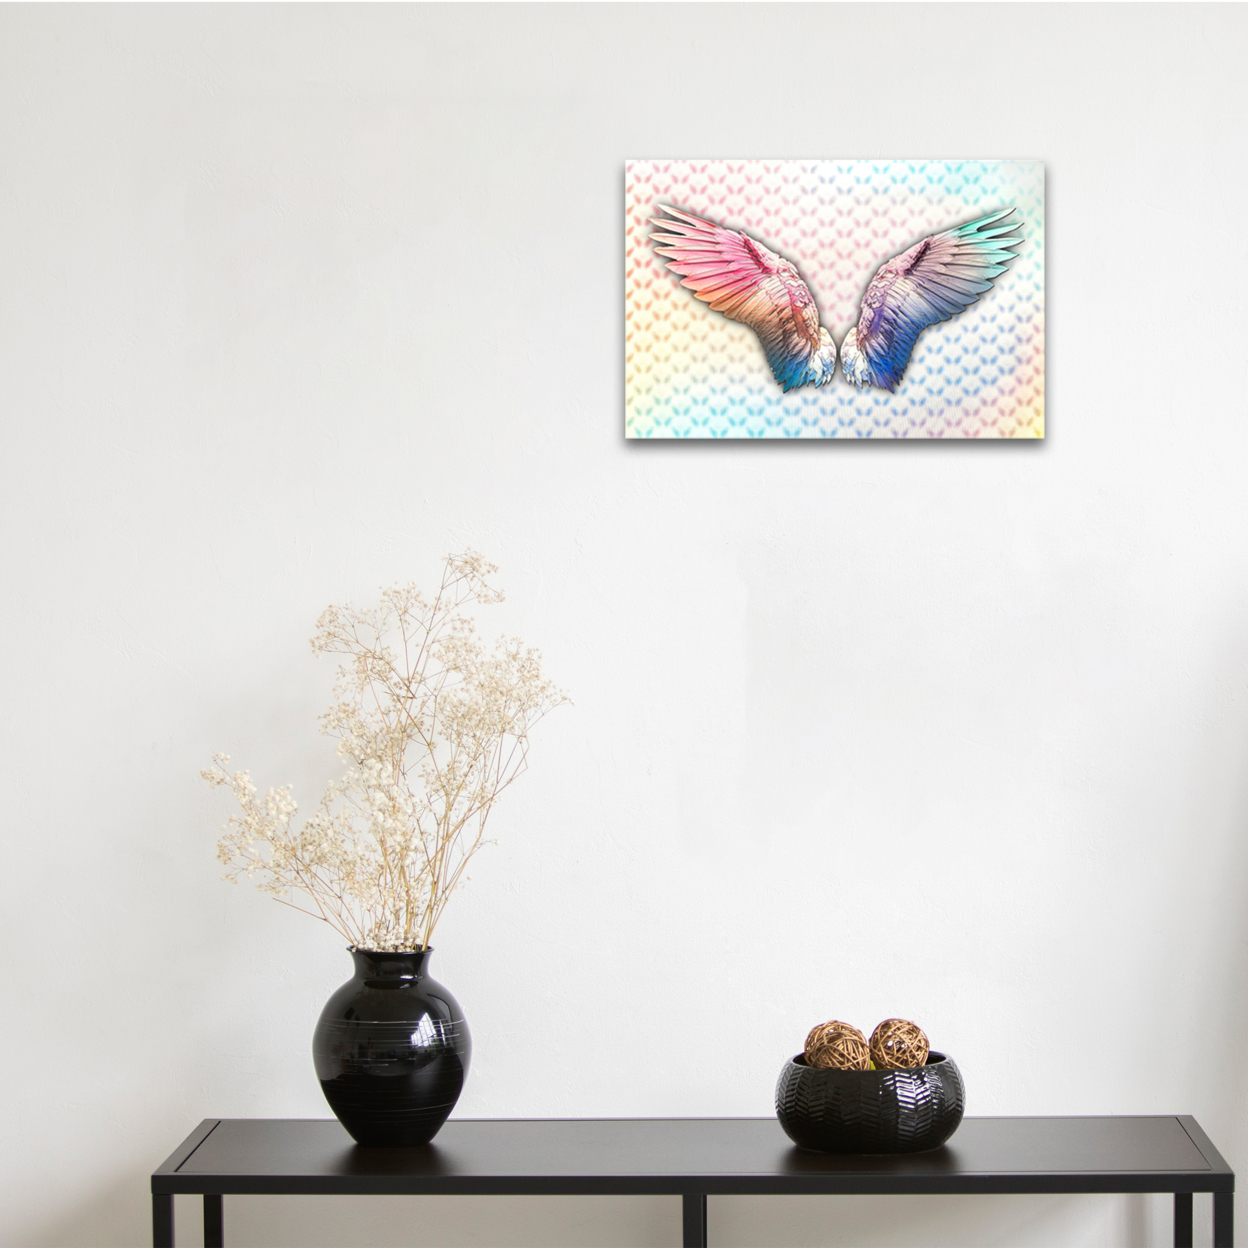 5D Multi-Dimensional Wall Art - Custom Made Angel Wings Wall Art Print On Strong Polycarbonate Panel W/ Vibrant Colors By Matashi (8x10 In)